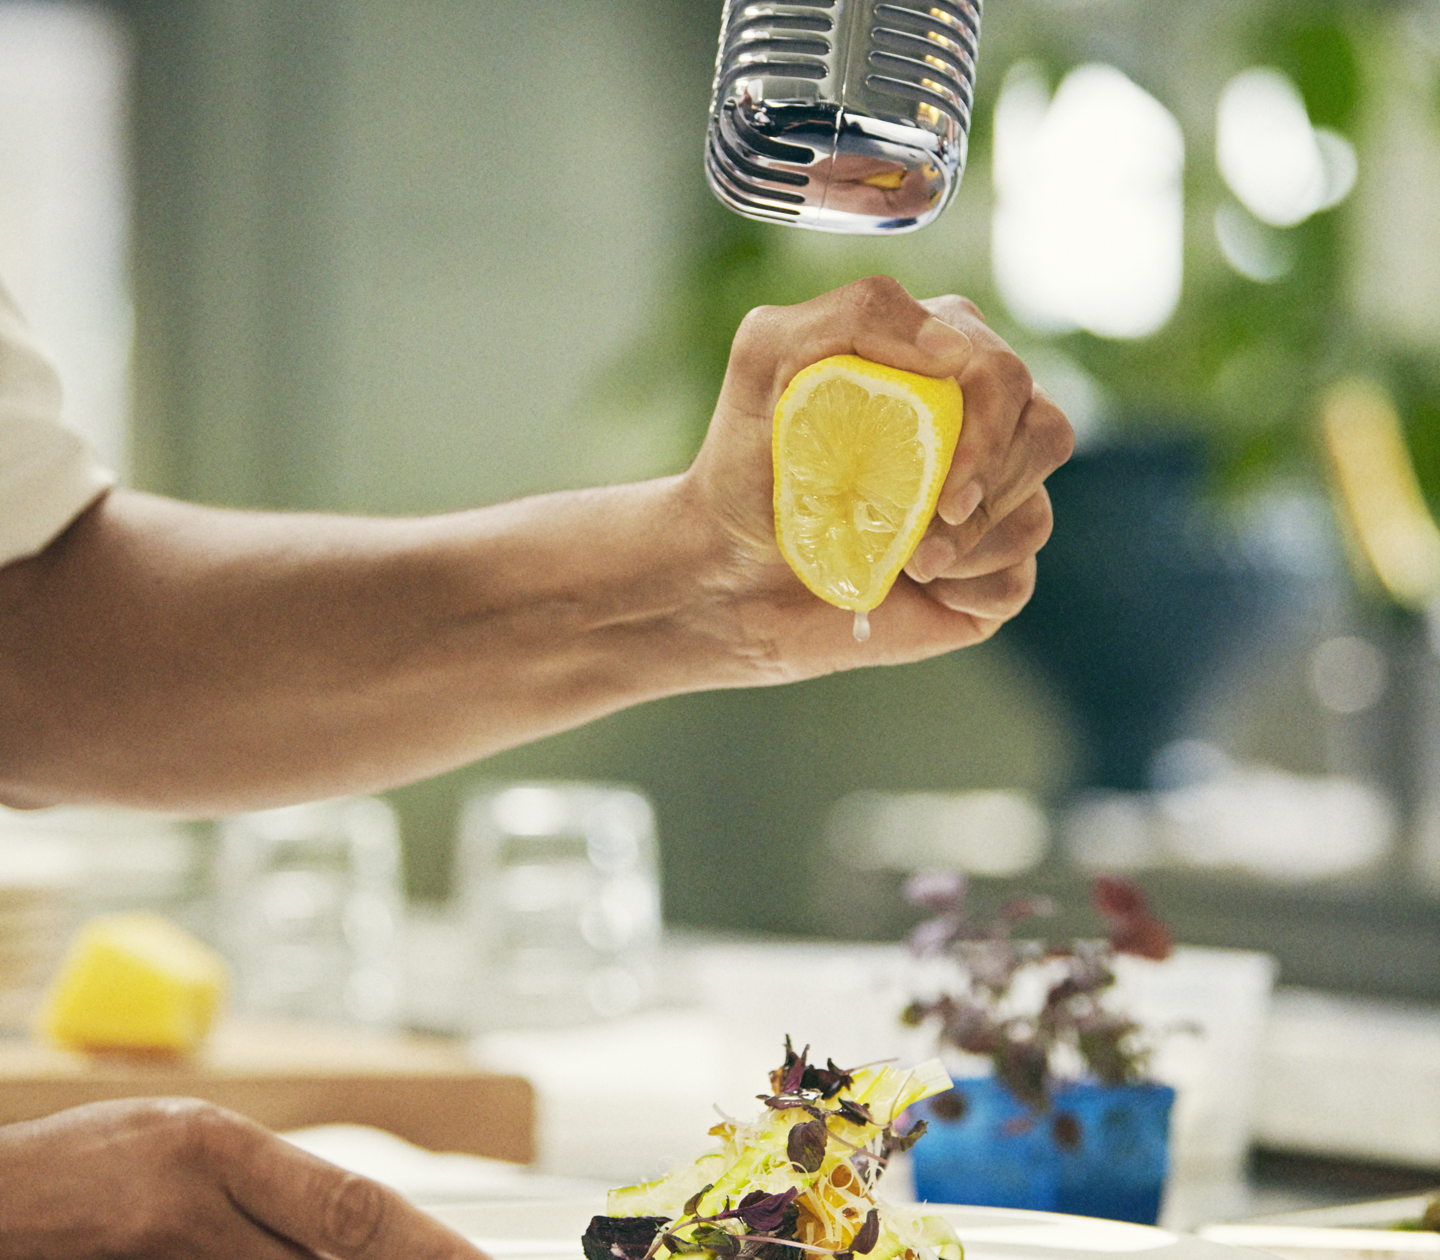 Man squeezing the juice out of a lemon over plate of food